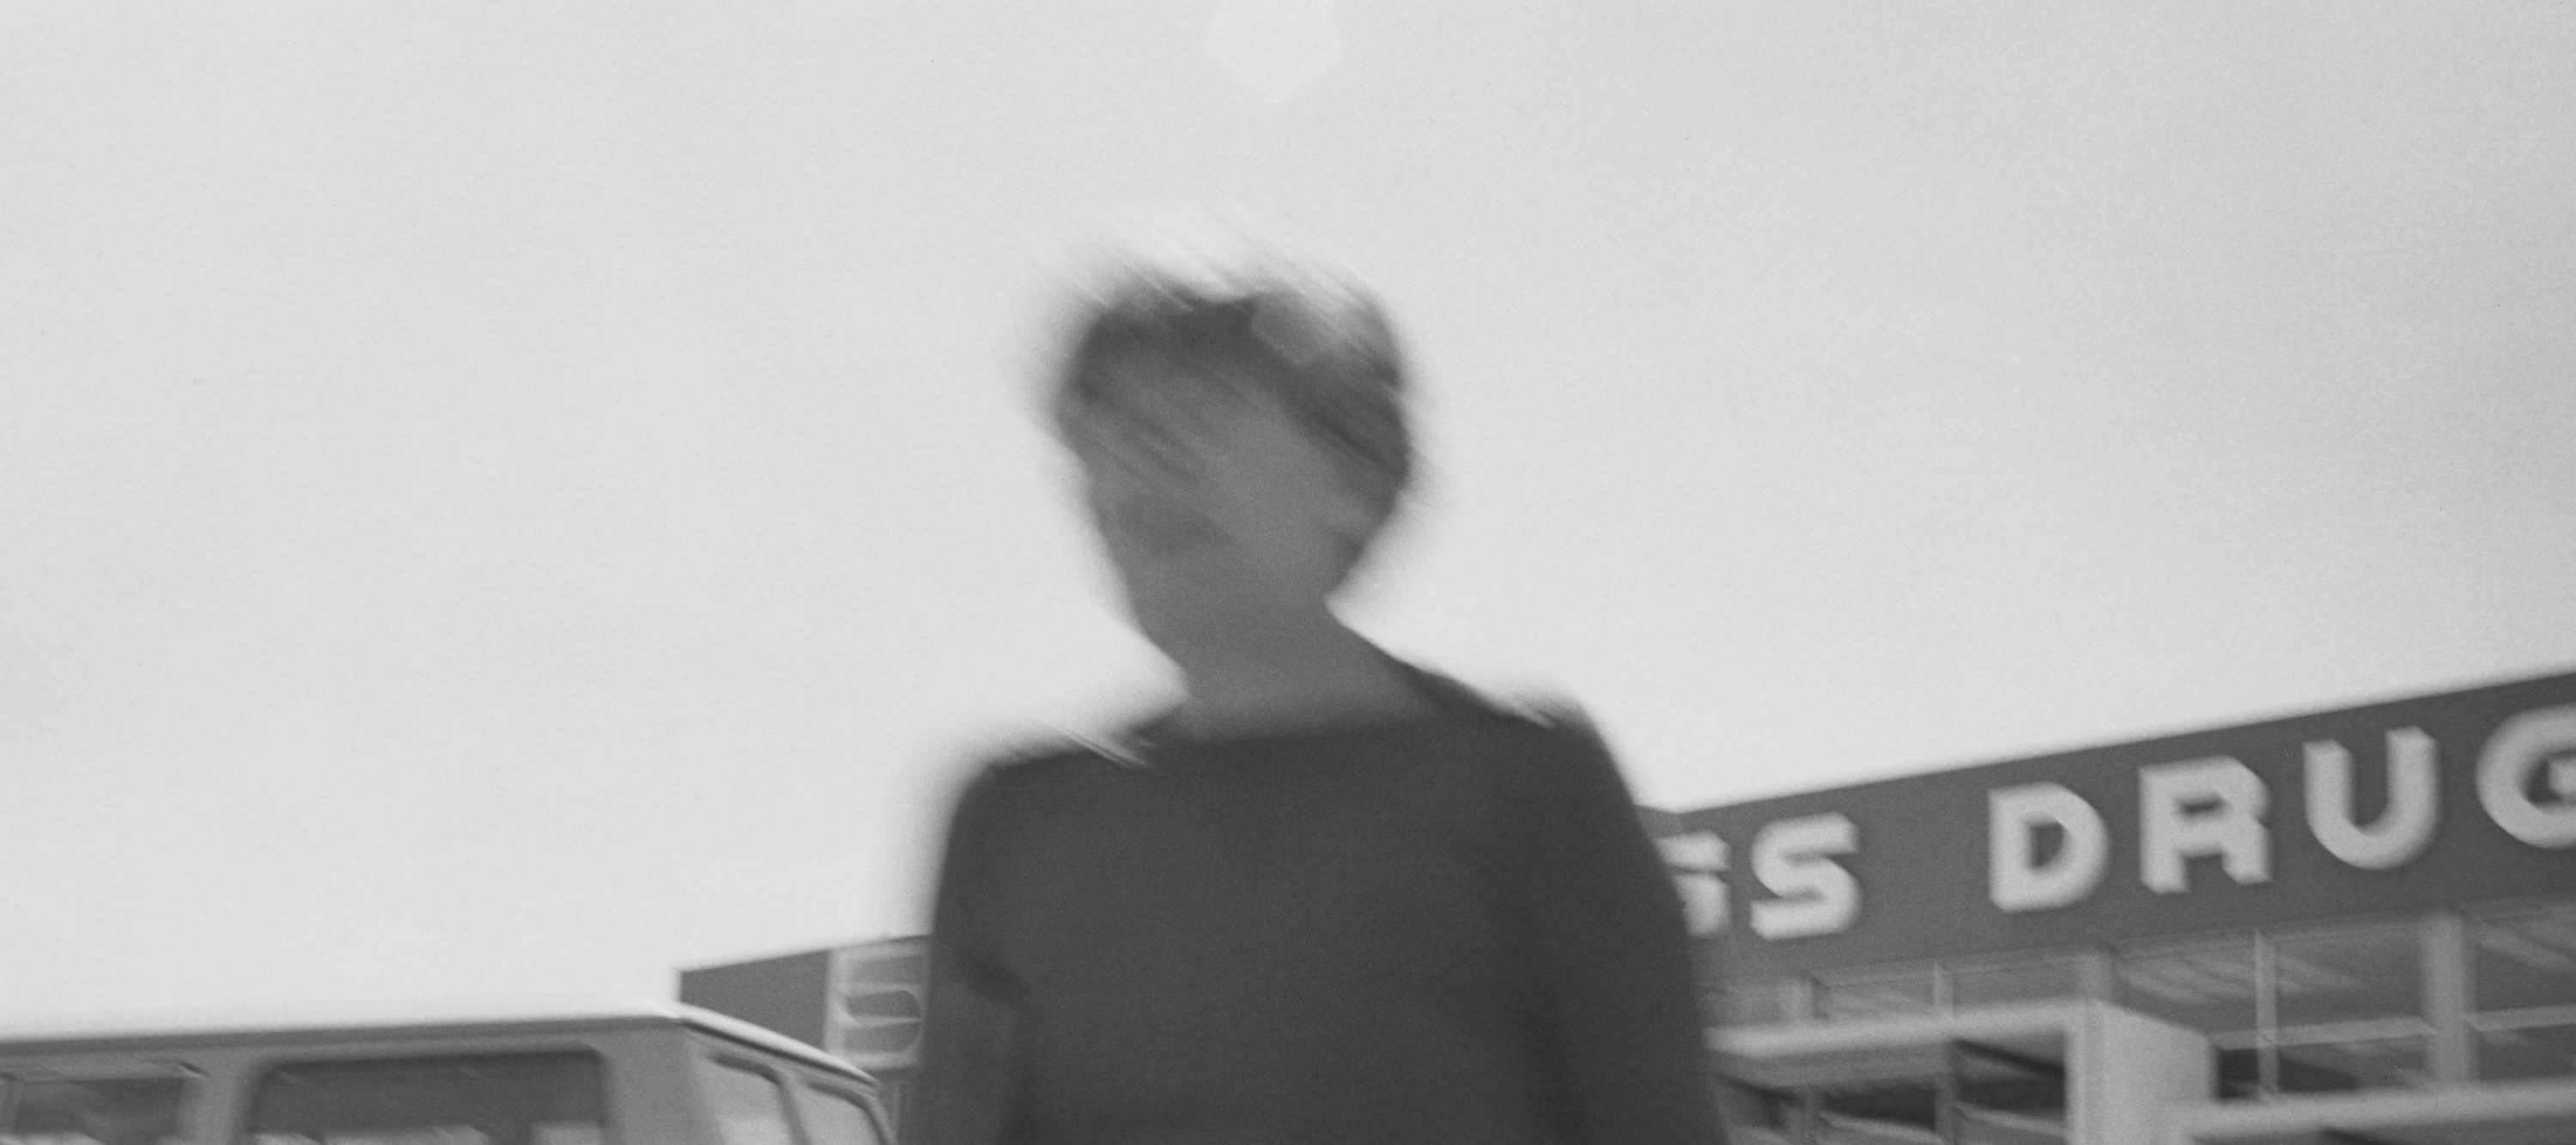 Black and white photograph of a figure blurred in front of a pharmacy